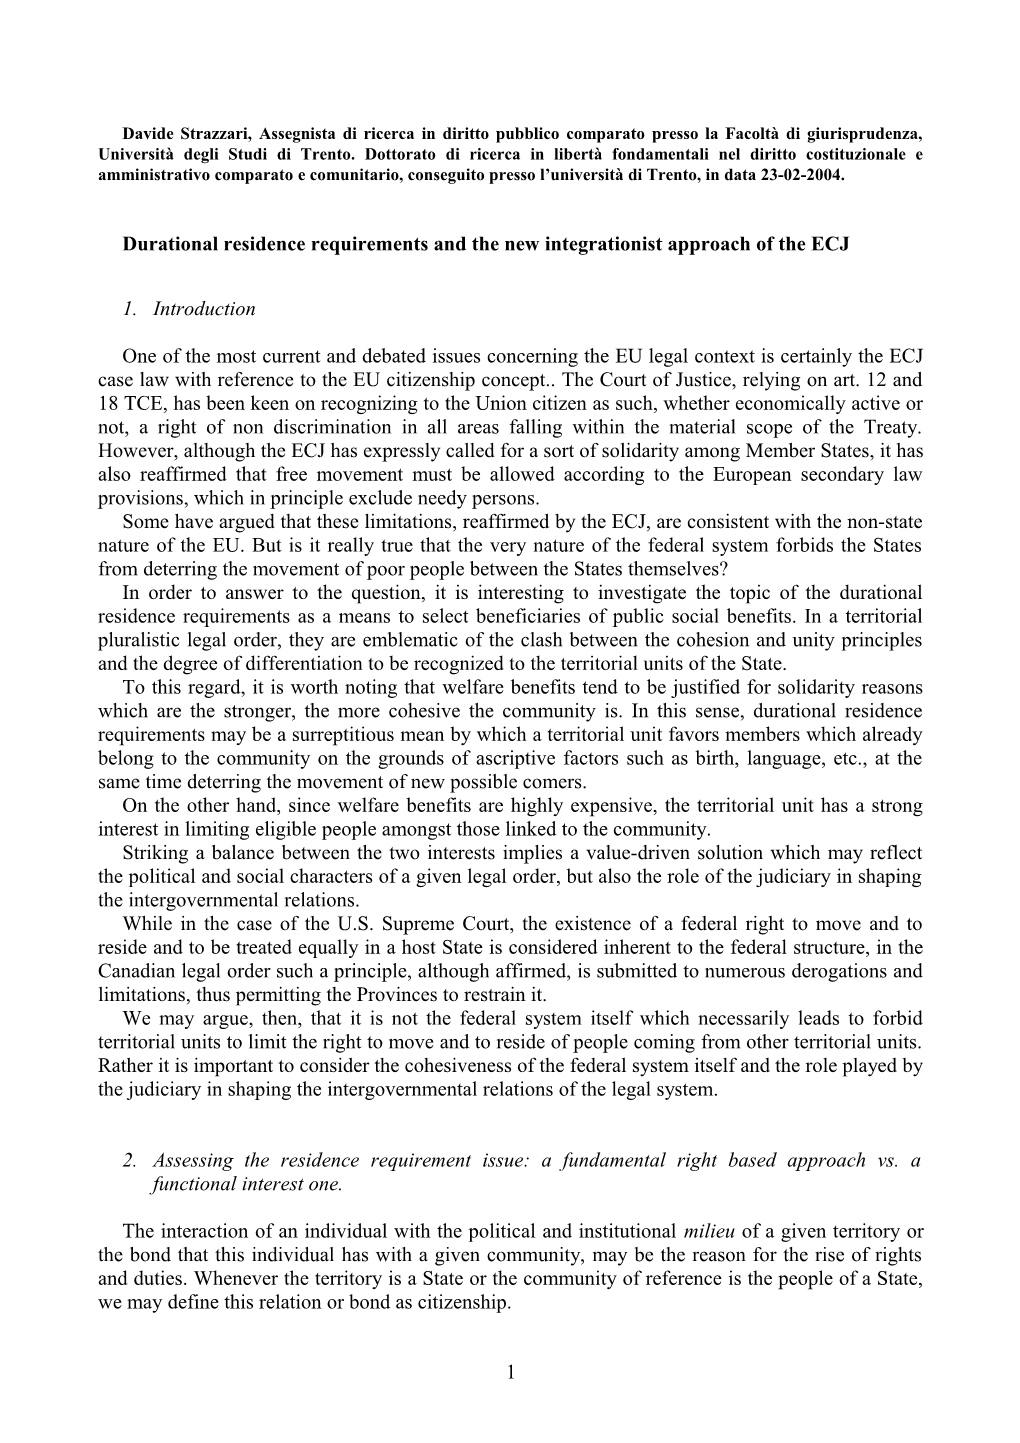 Durational Residence Requirements and the New Integrationist Approach of the ECJ